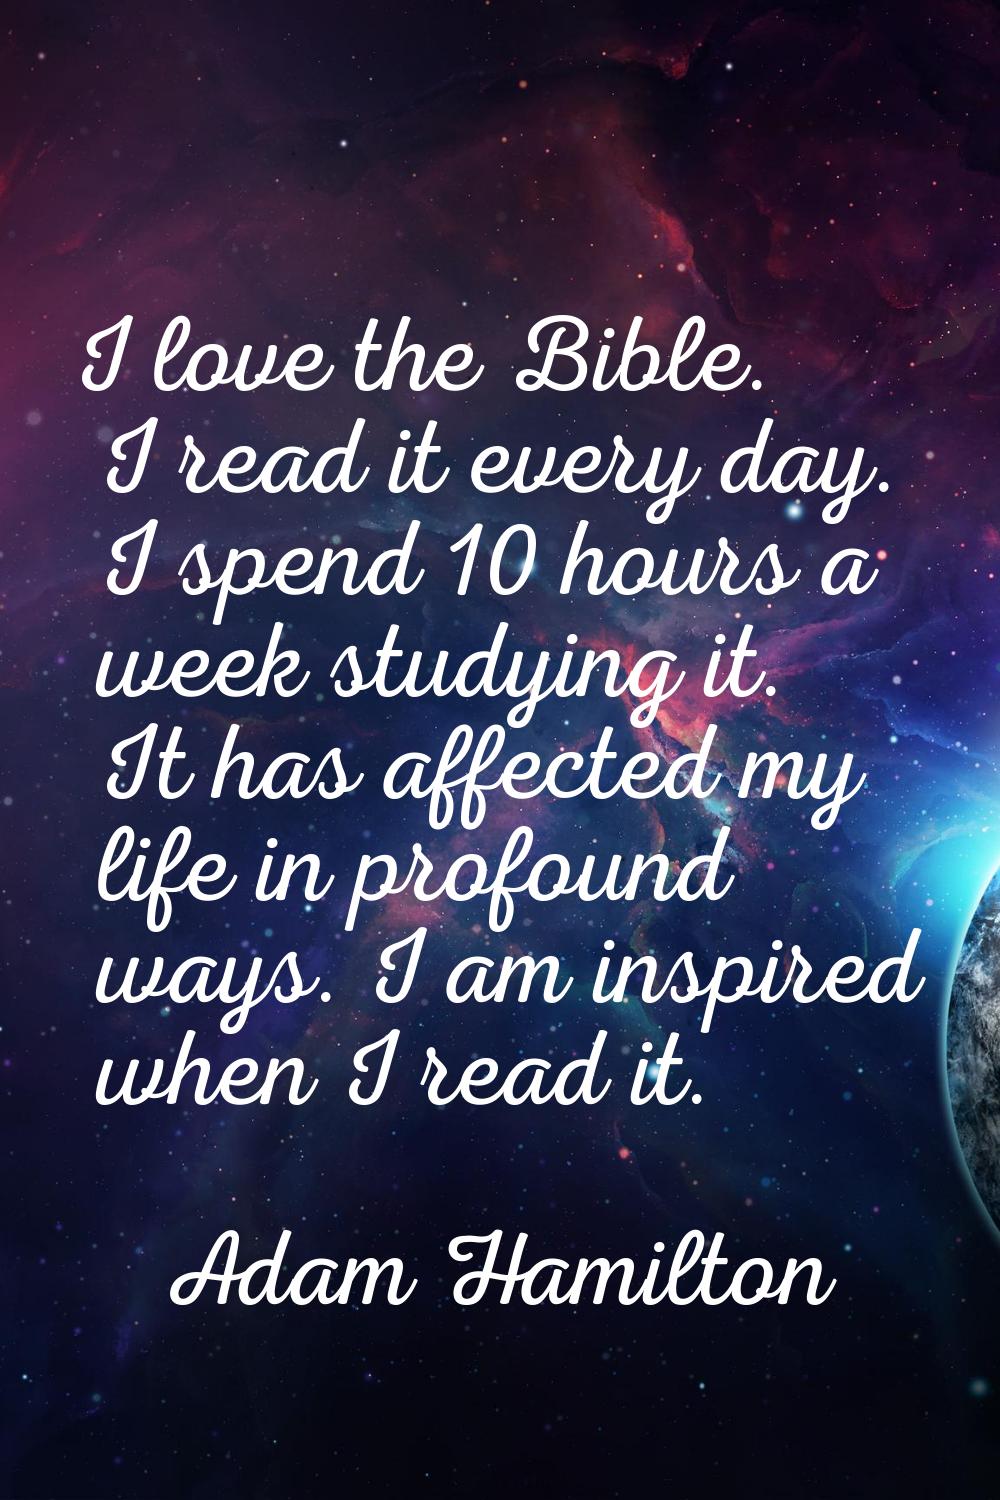 I love the Bible. I read it every day. I spend 10 hours a week studying it. It has affected my life